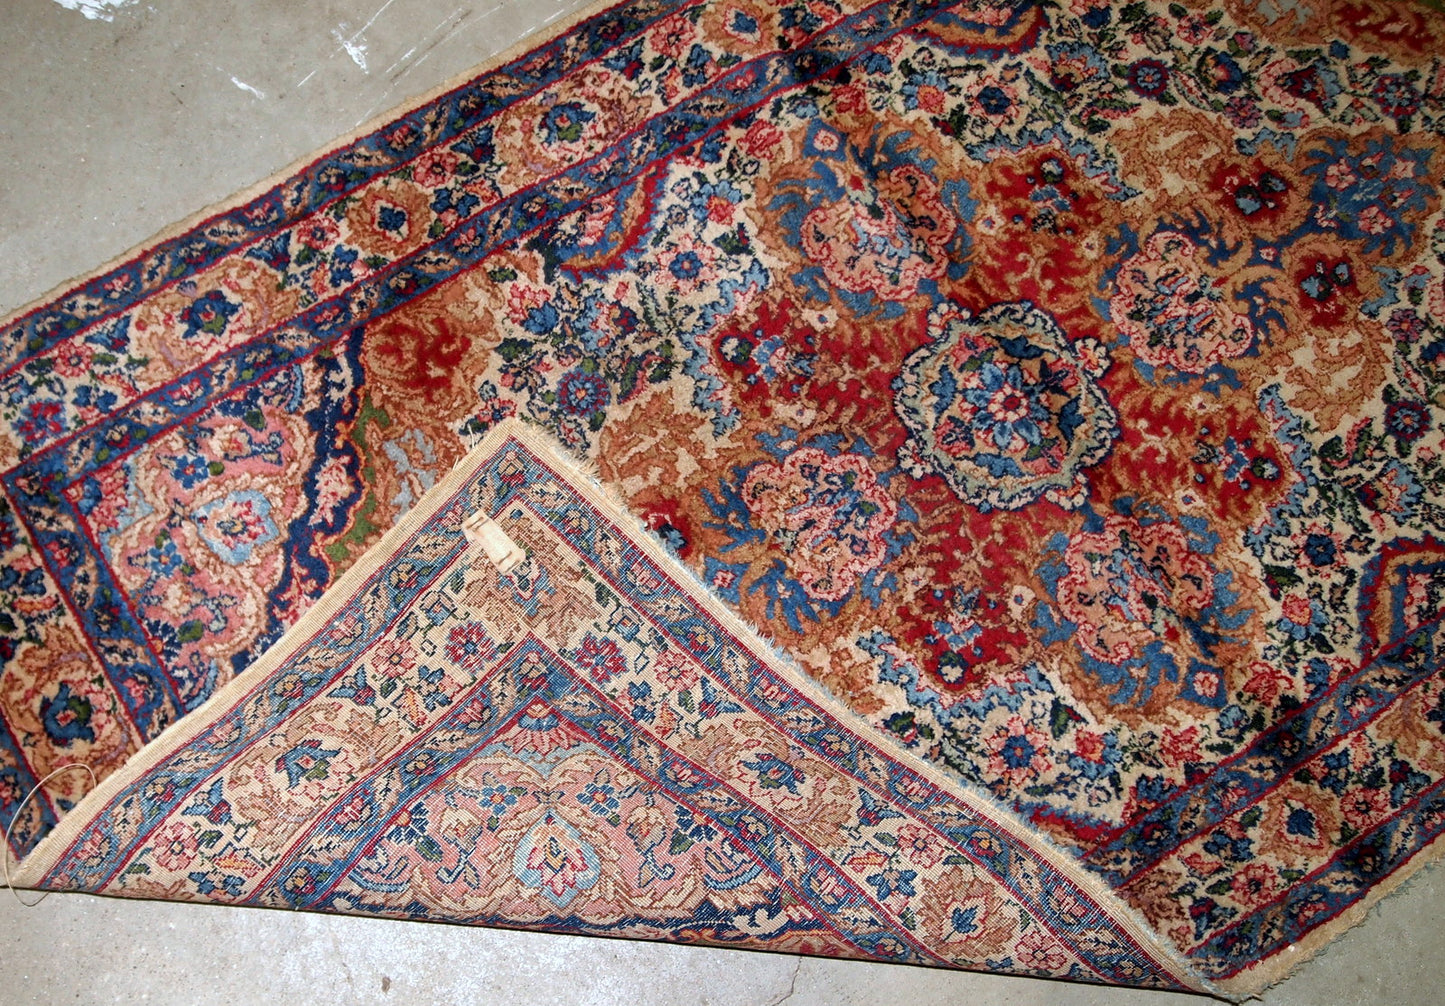 Handmade antique Kerman rug from Middle East in colorful shades. The rug is in original good condition.